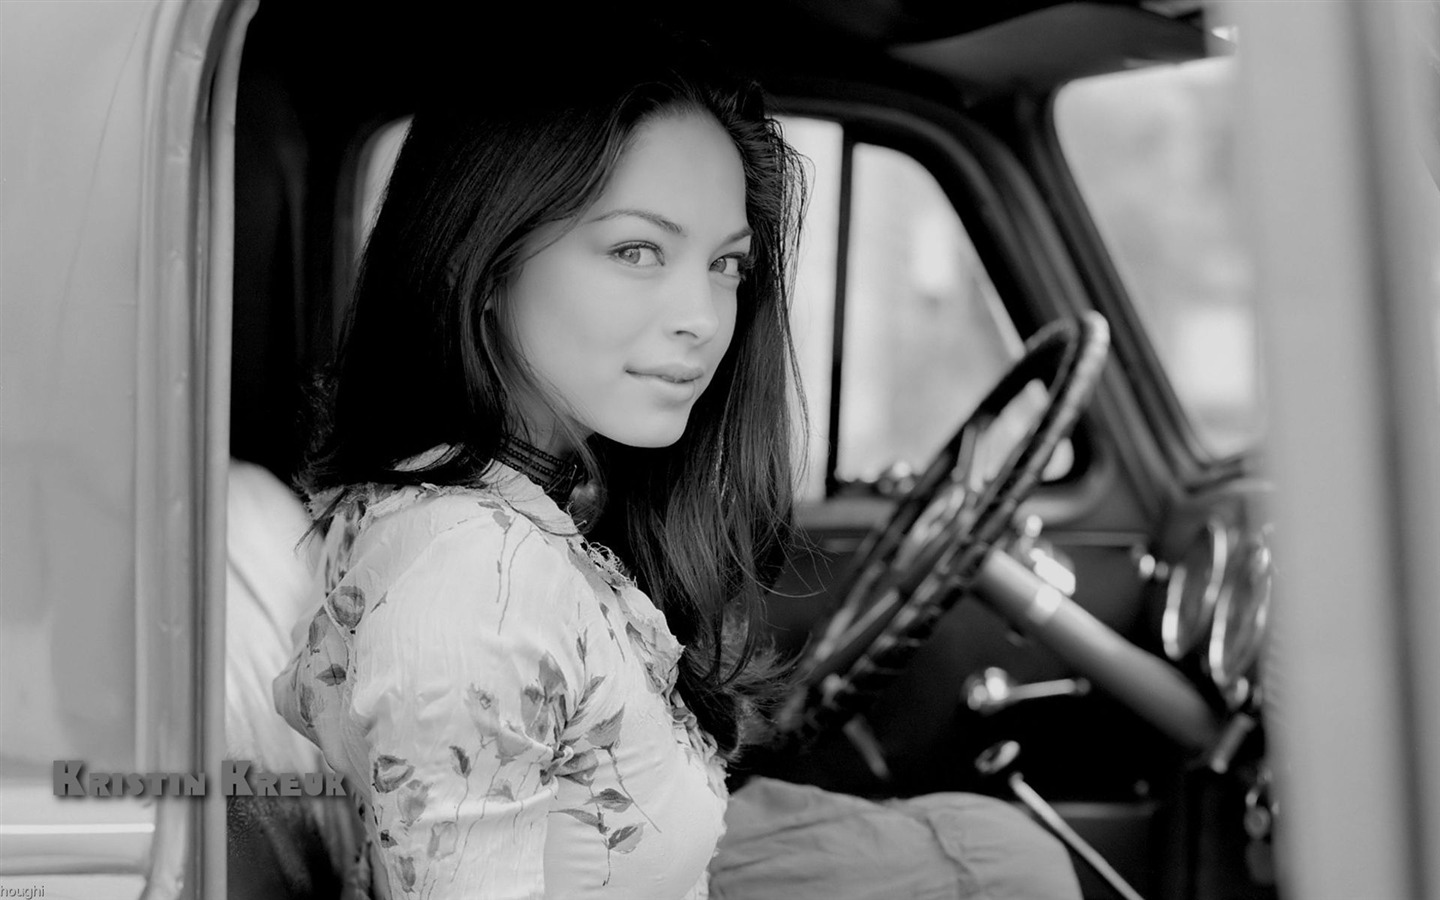 Kristin Kreuk #010 - 1440x900 Wallpapers Pictures Photos Images